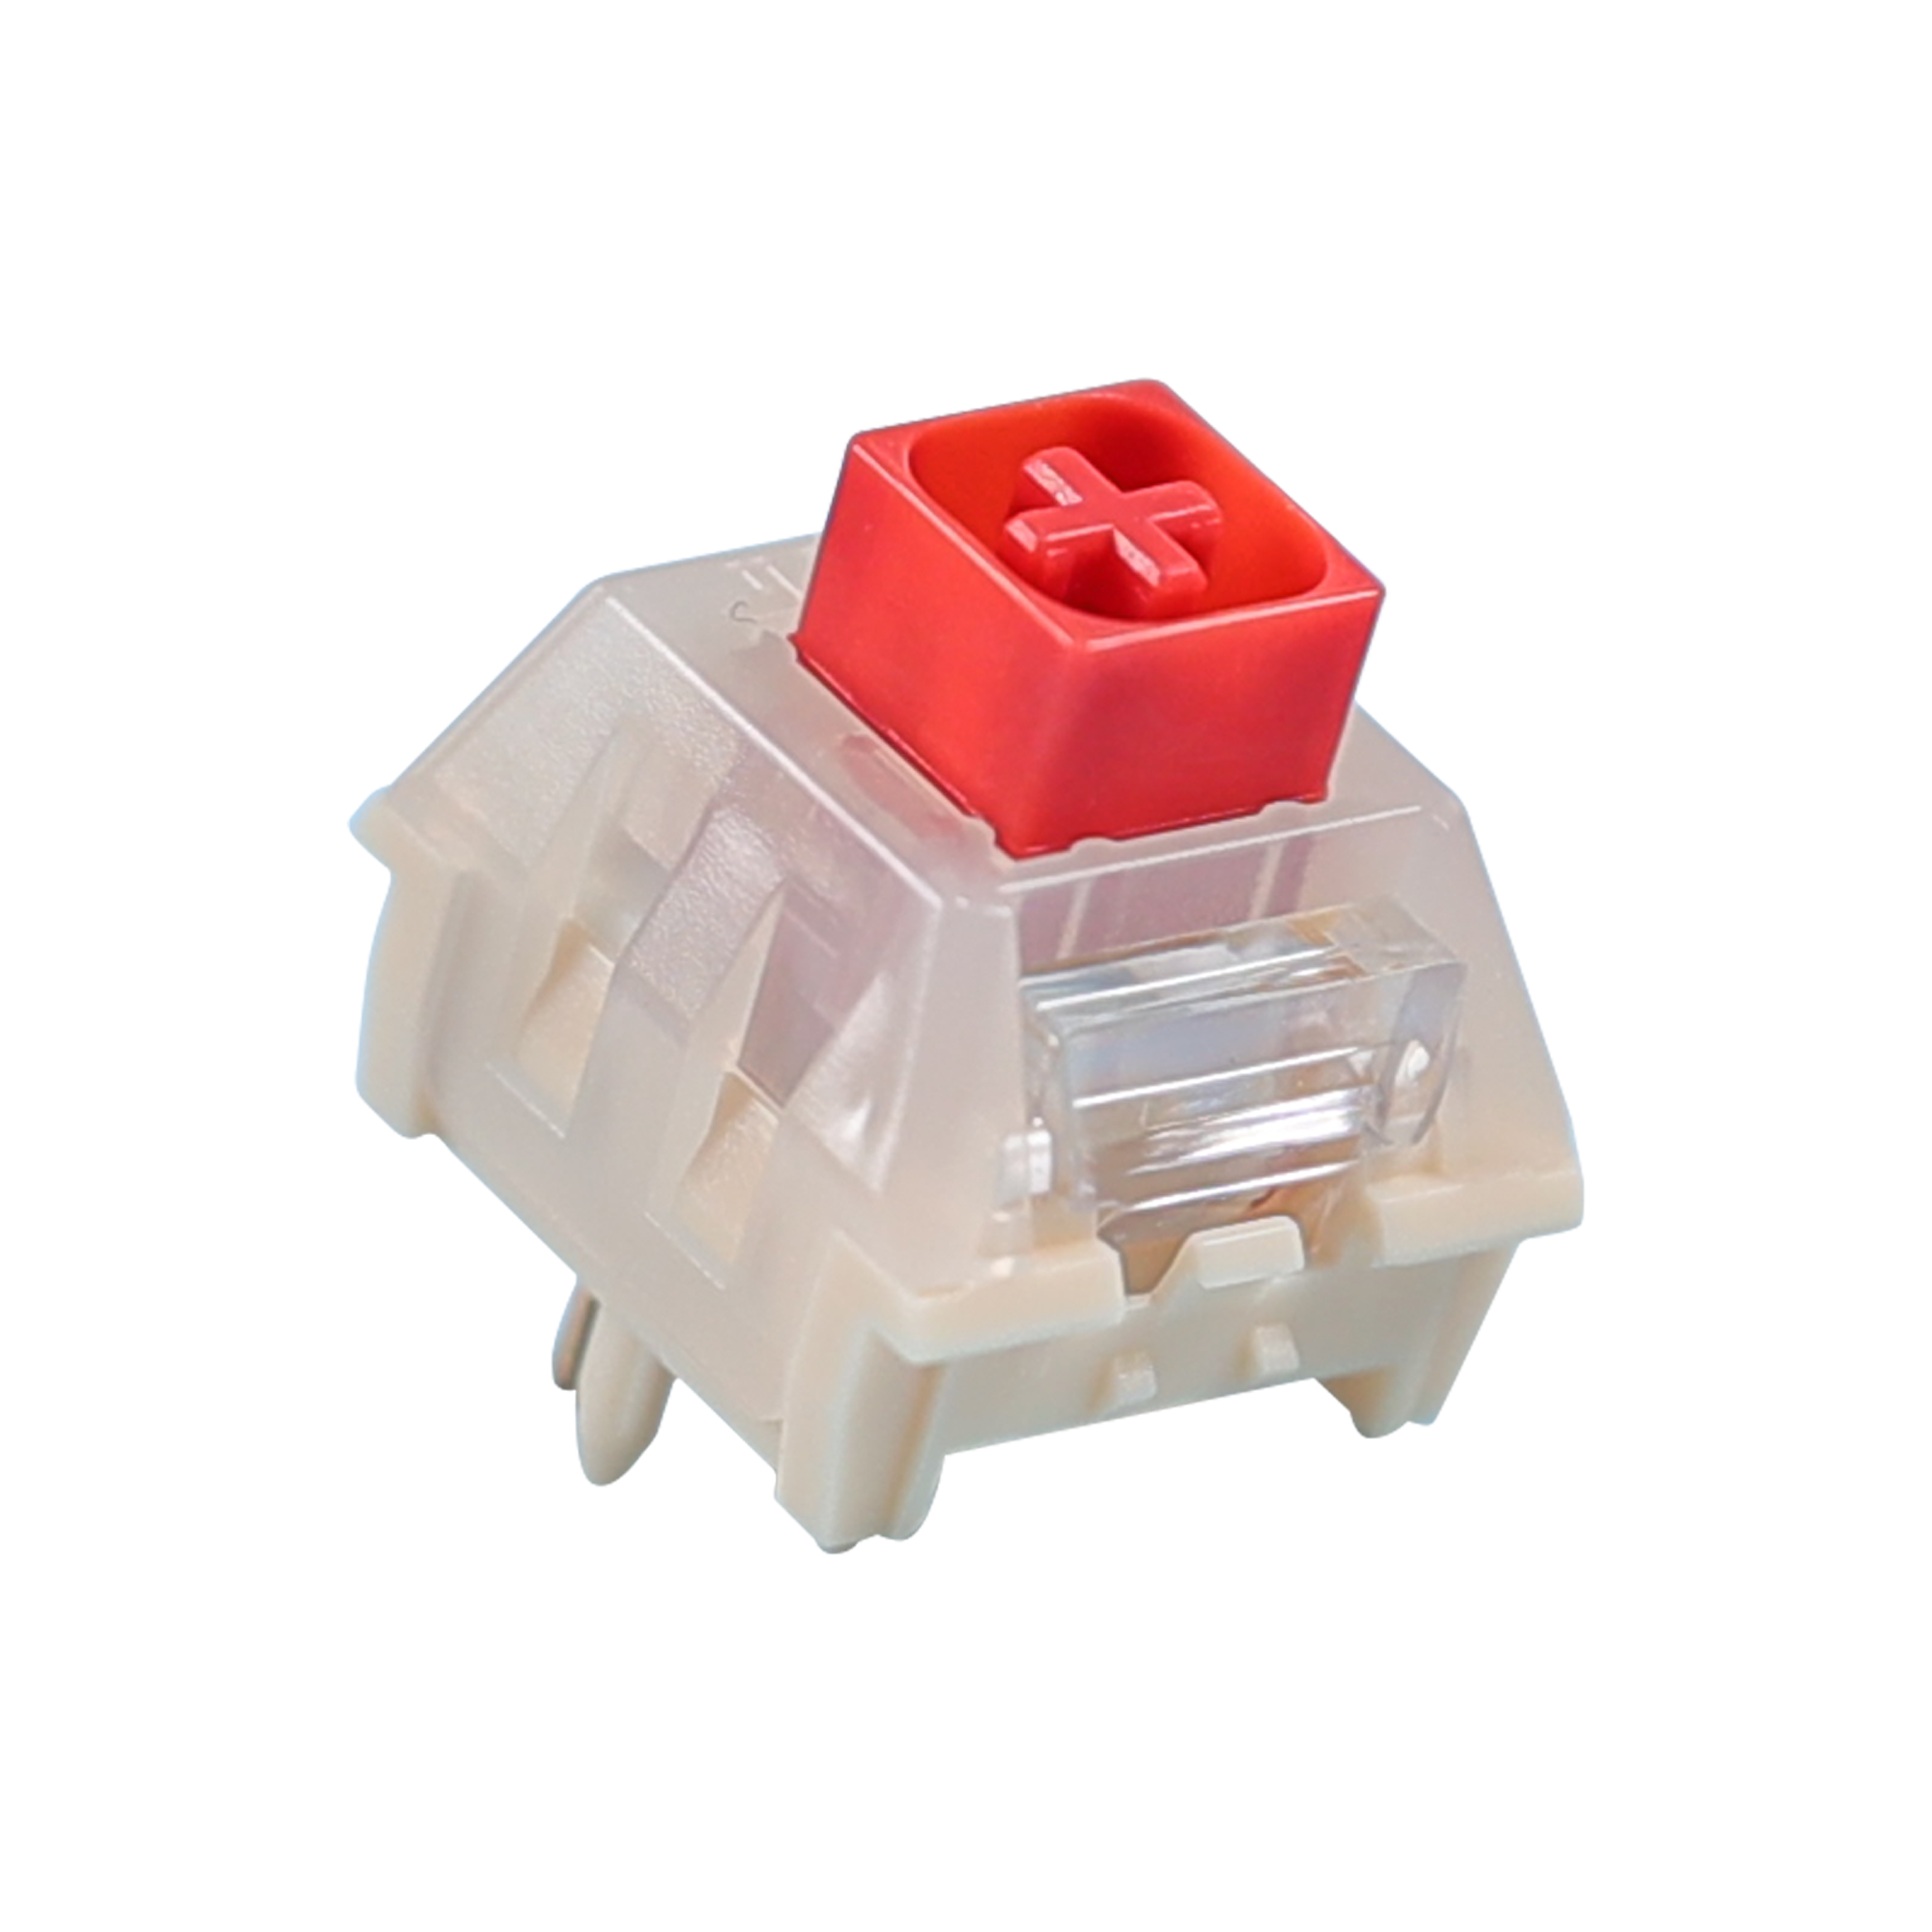 Kailh Red Bean Pudding Linear Box Switch-Chosfox